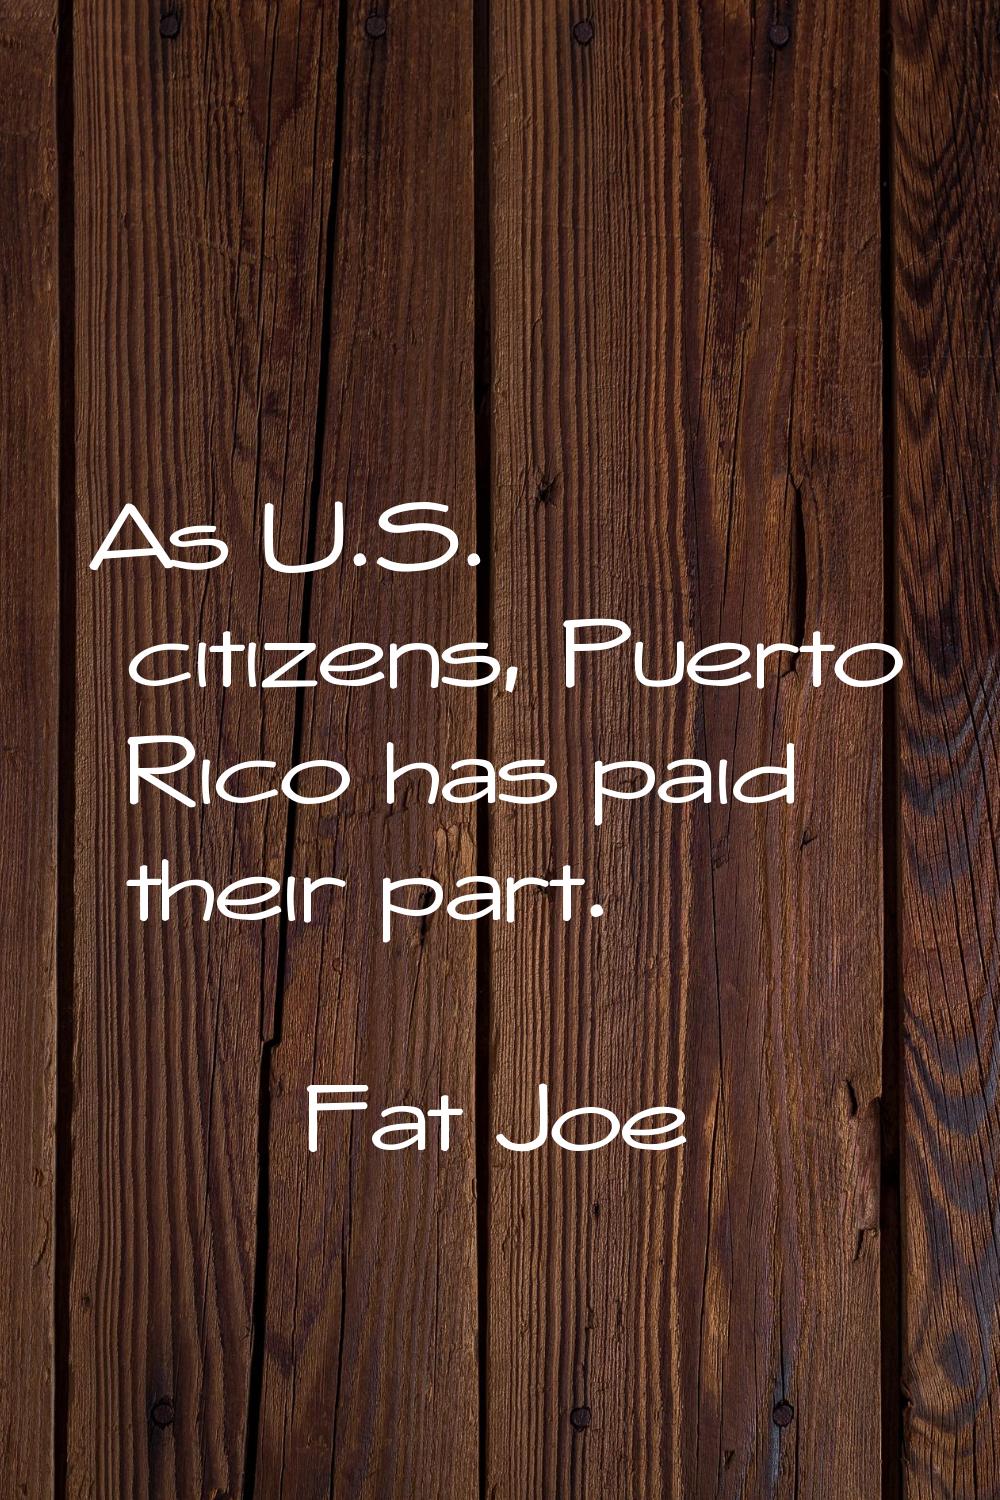 As U.S. citizens, Puerto Rico has paid their part.